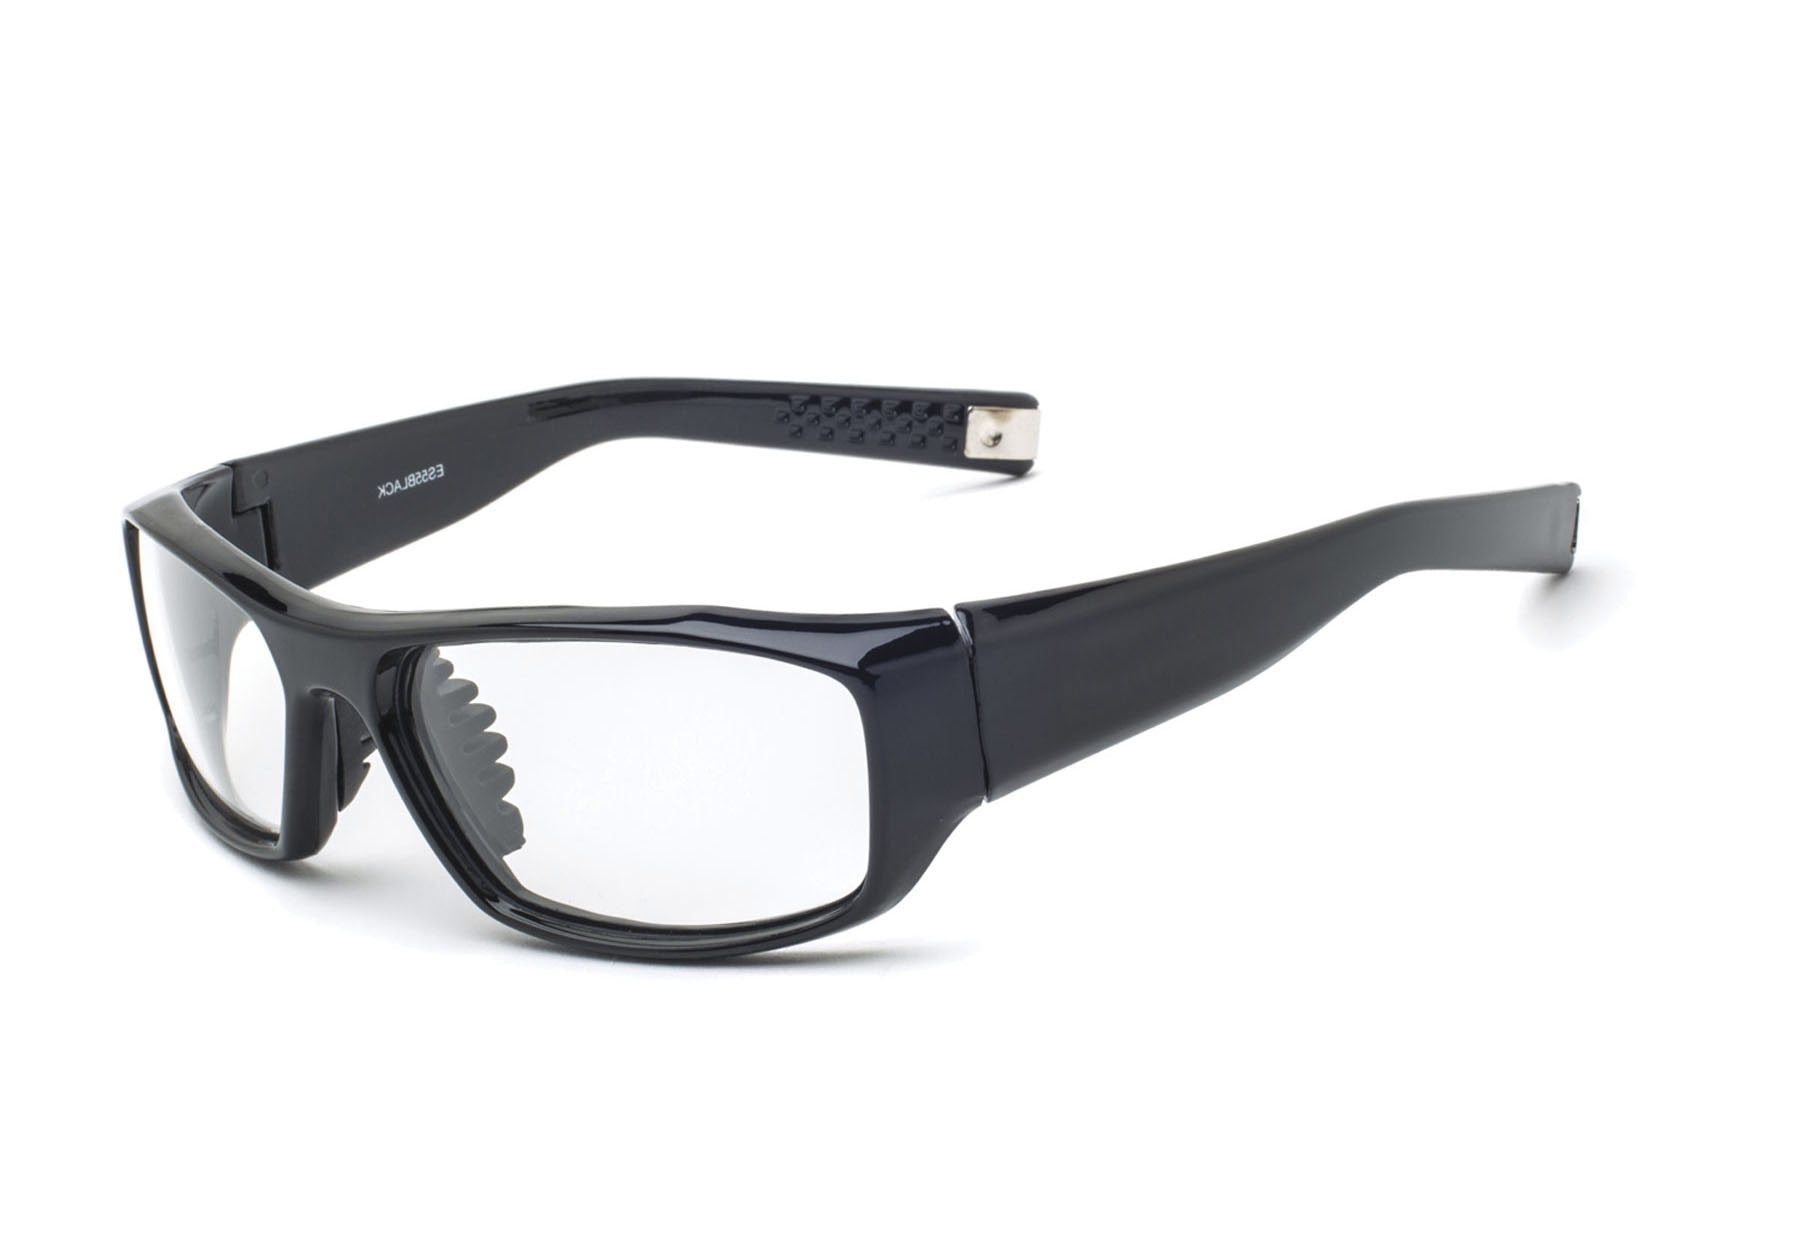 Radiation Protection Glasses: An Overview